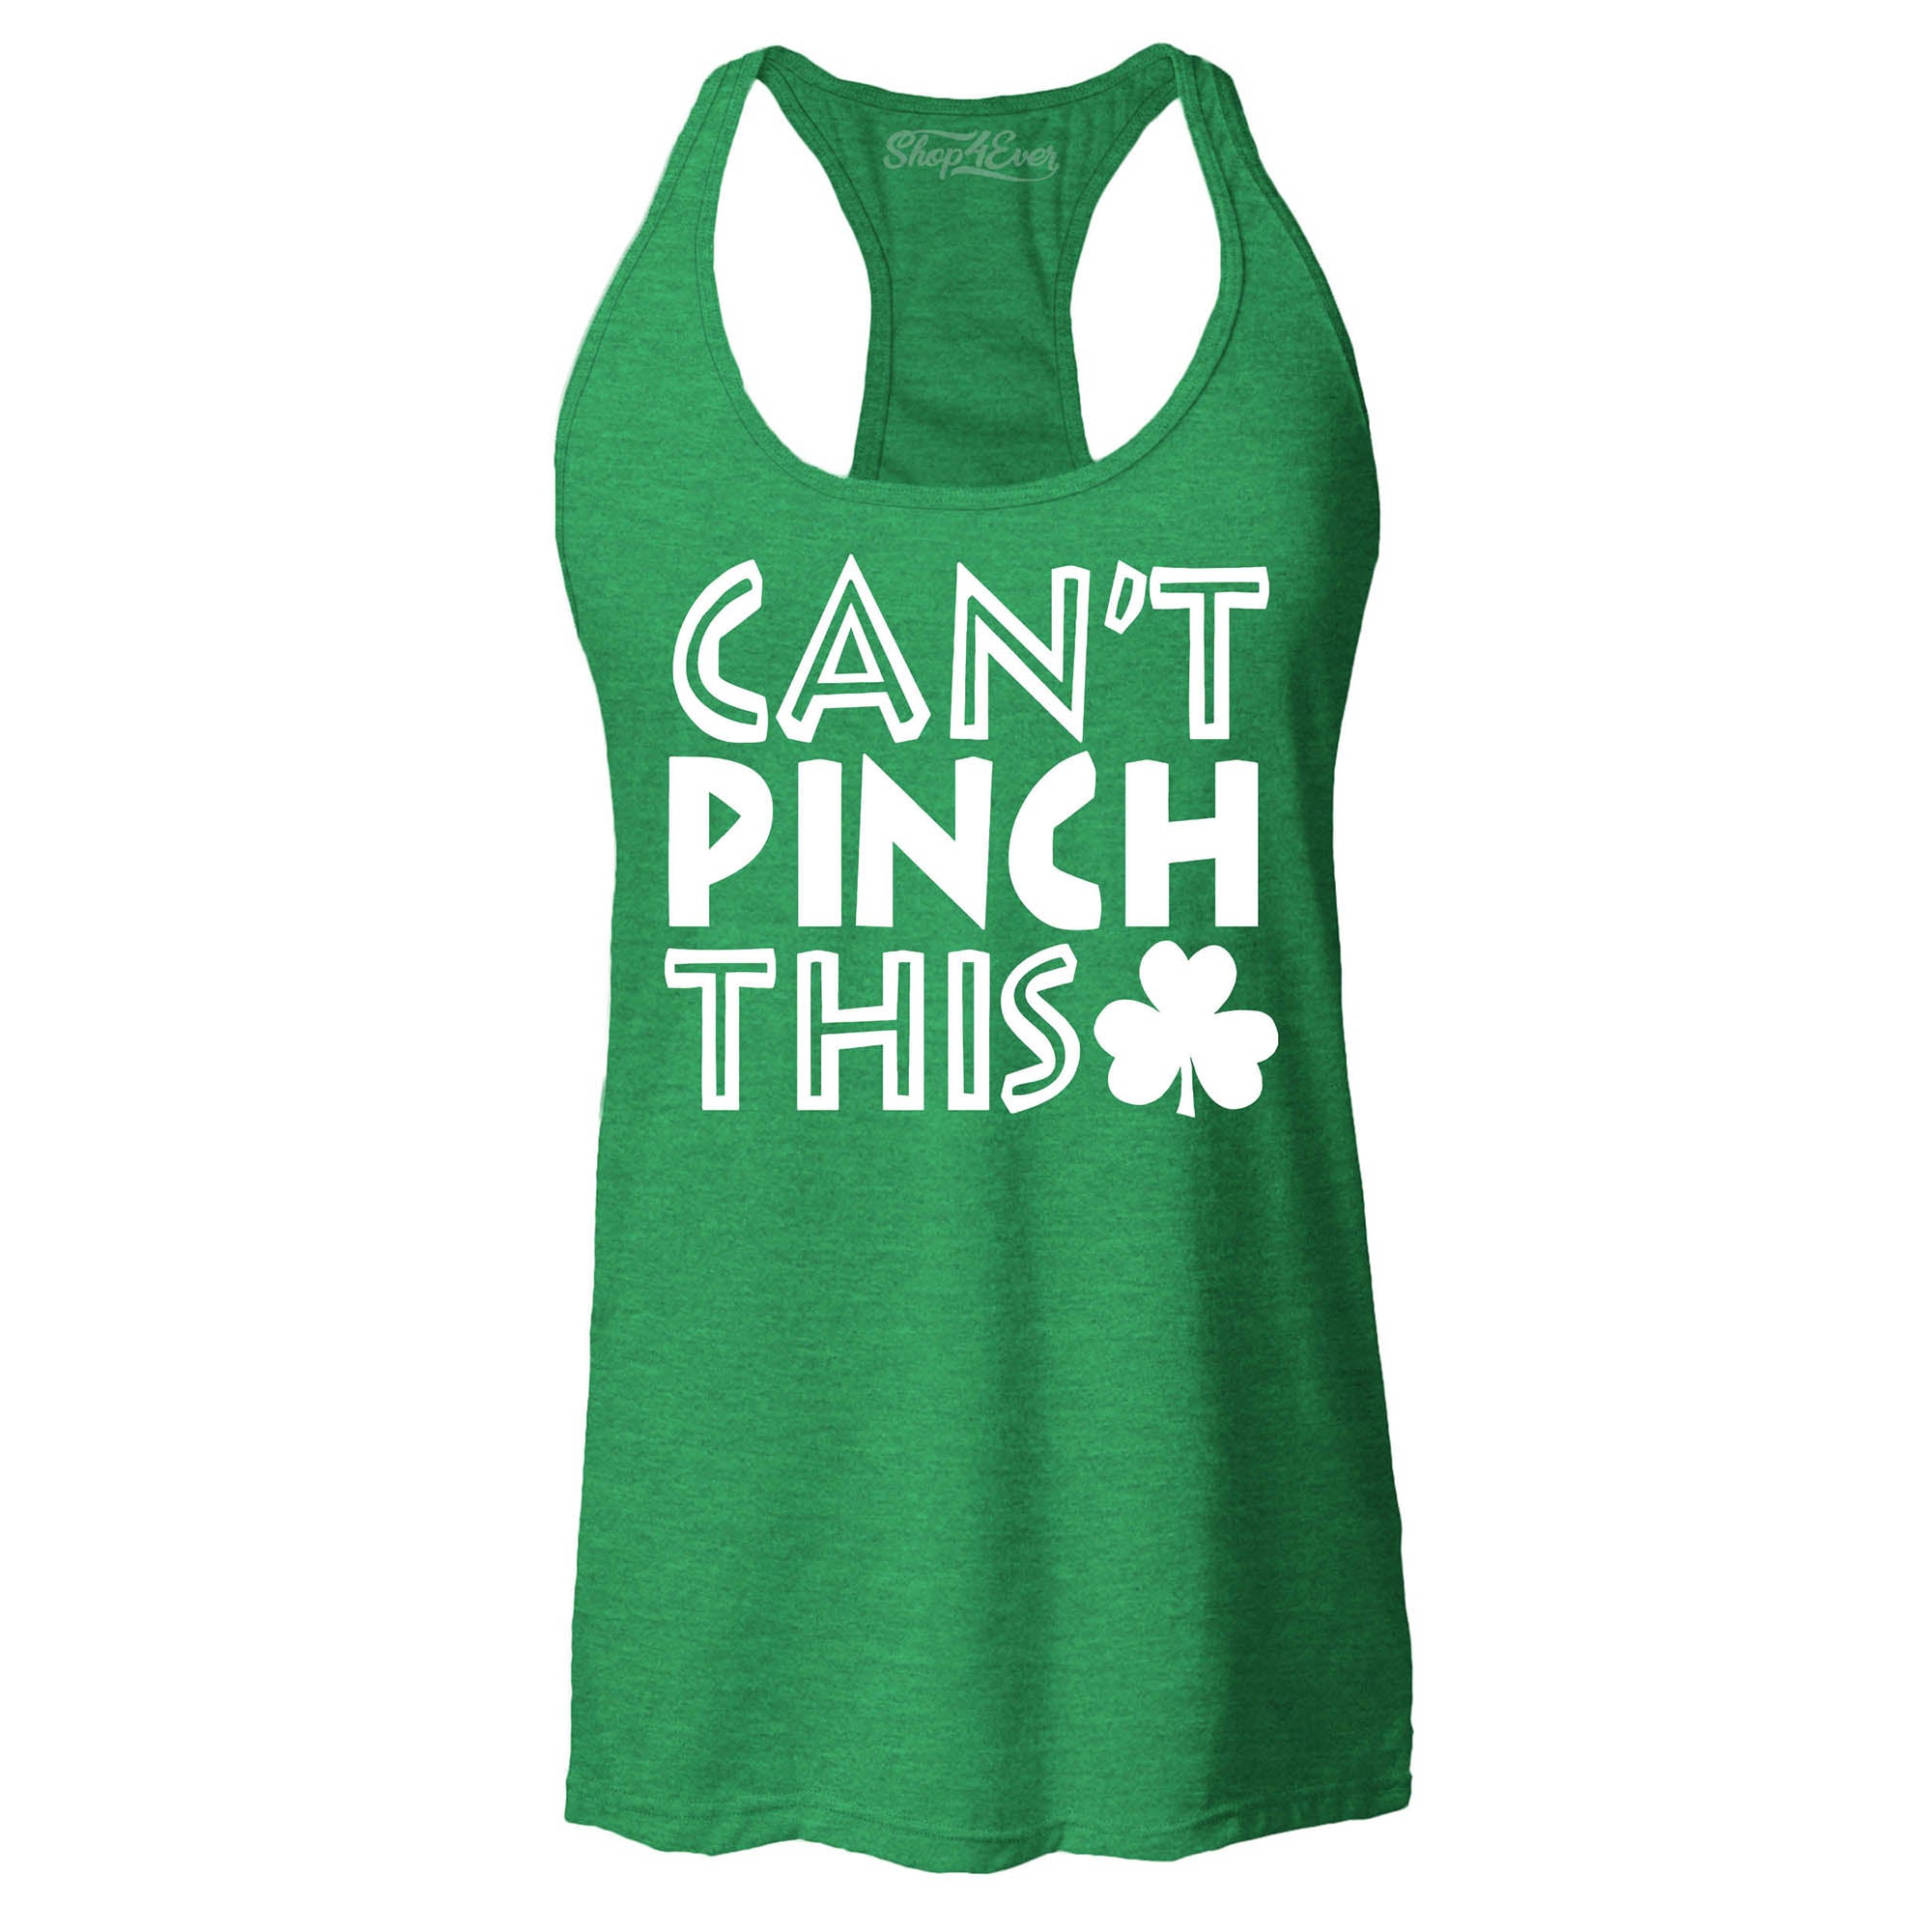 Can't Pinch This St. Patrick's Day Women's Racerback Tank Top Slim Fit